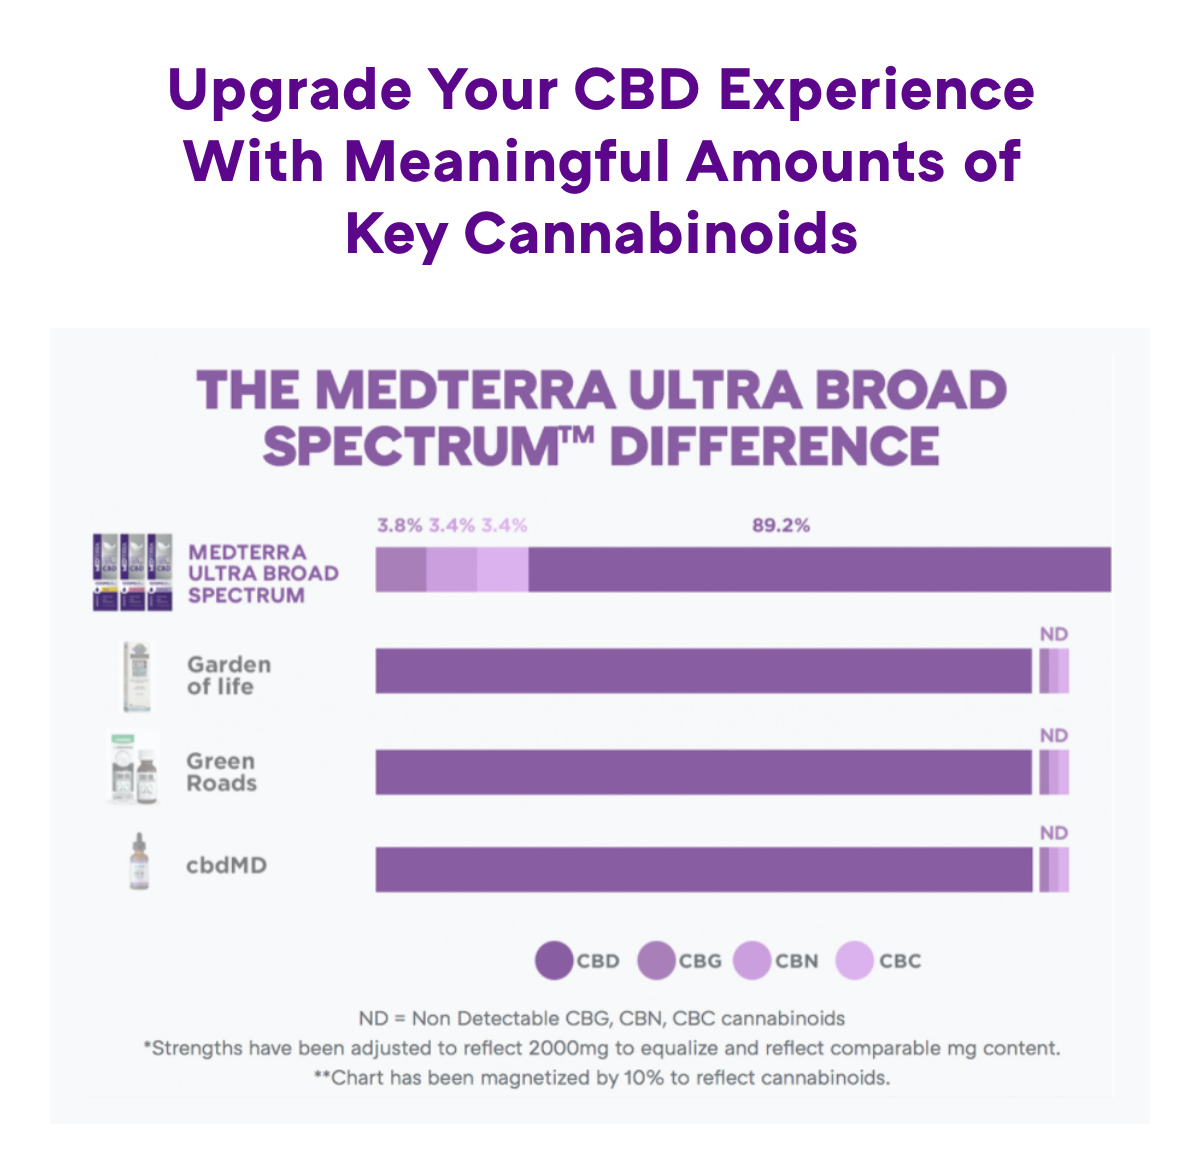 The Medterra Difference